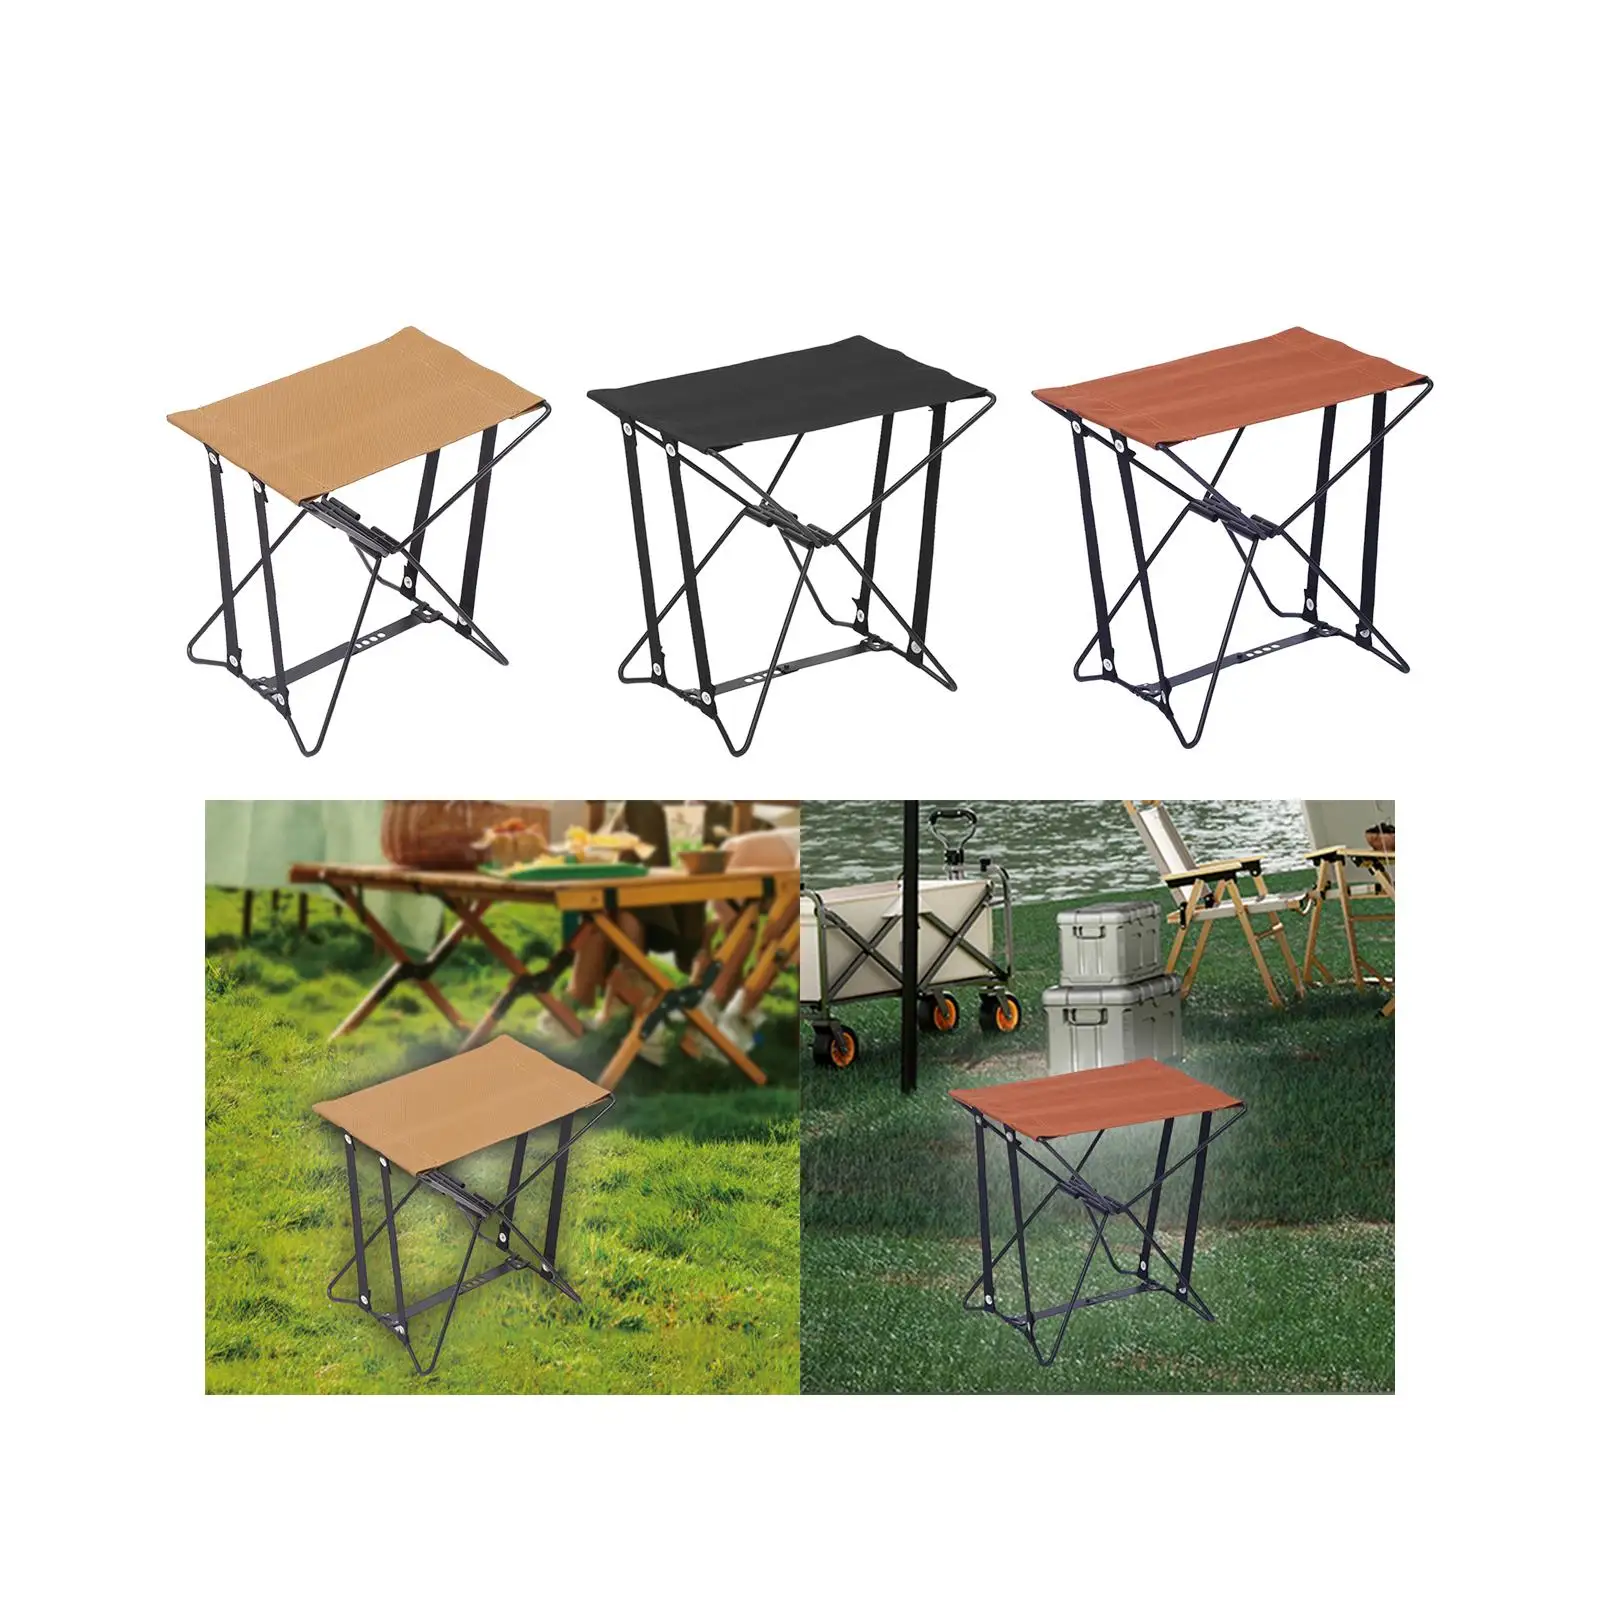 Camping Stool Portable Folding Stool under Desk Footstool Compact Saddle Chair Foldable Footstool for BBQ Garden Concert Lawn